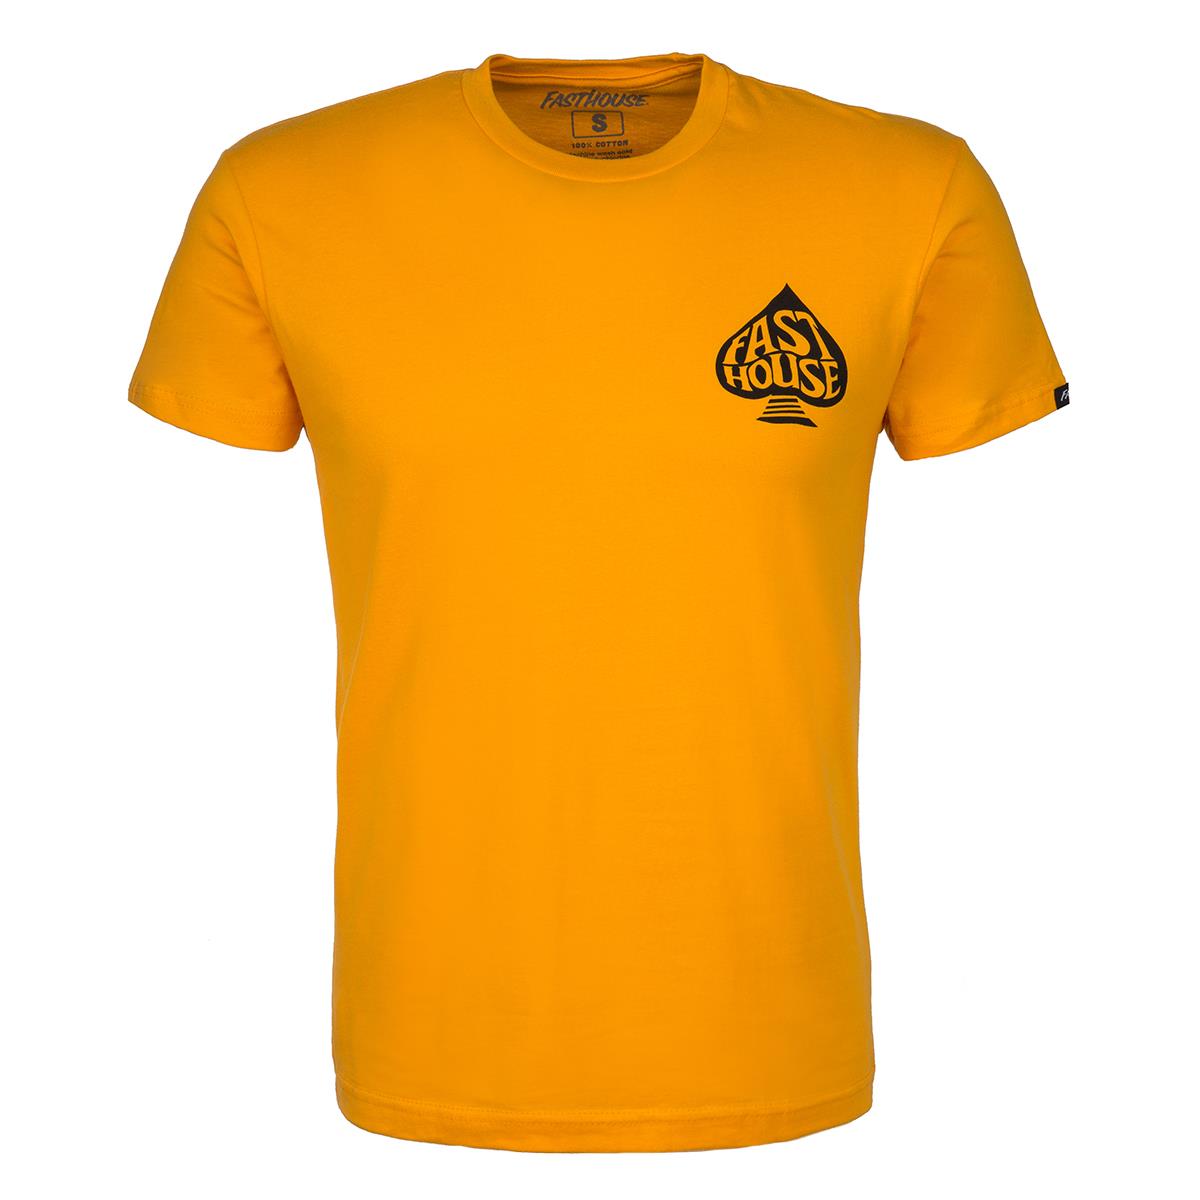 Fasthouse T-Shirt Fast Spade Gold